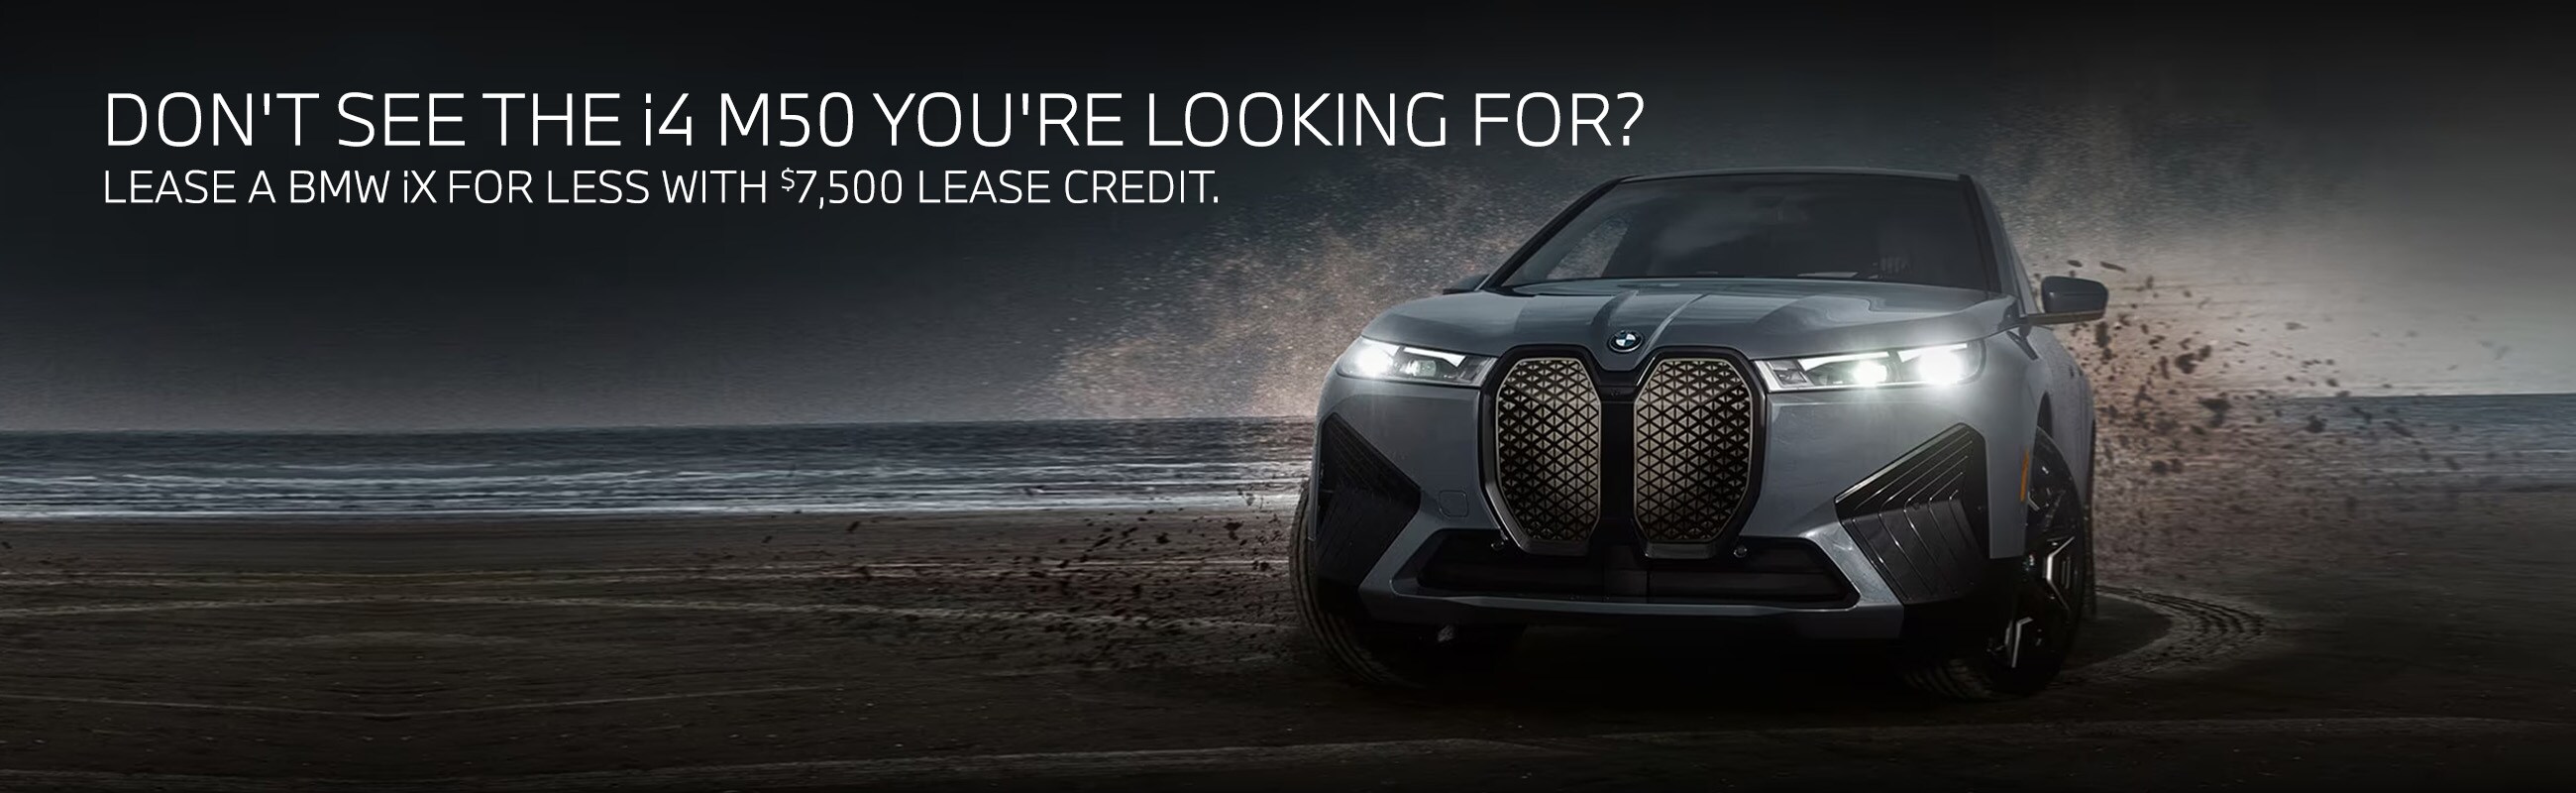 Don't see the i4 M50 you're looking for? Lease a BMW iX for less with $7,500 lease credit.